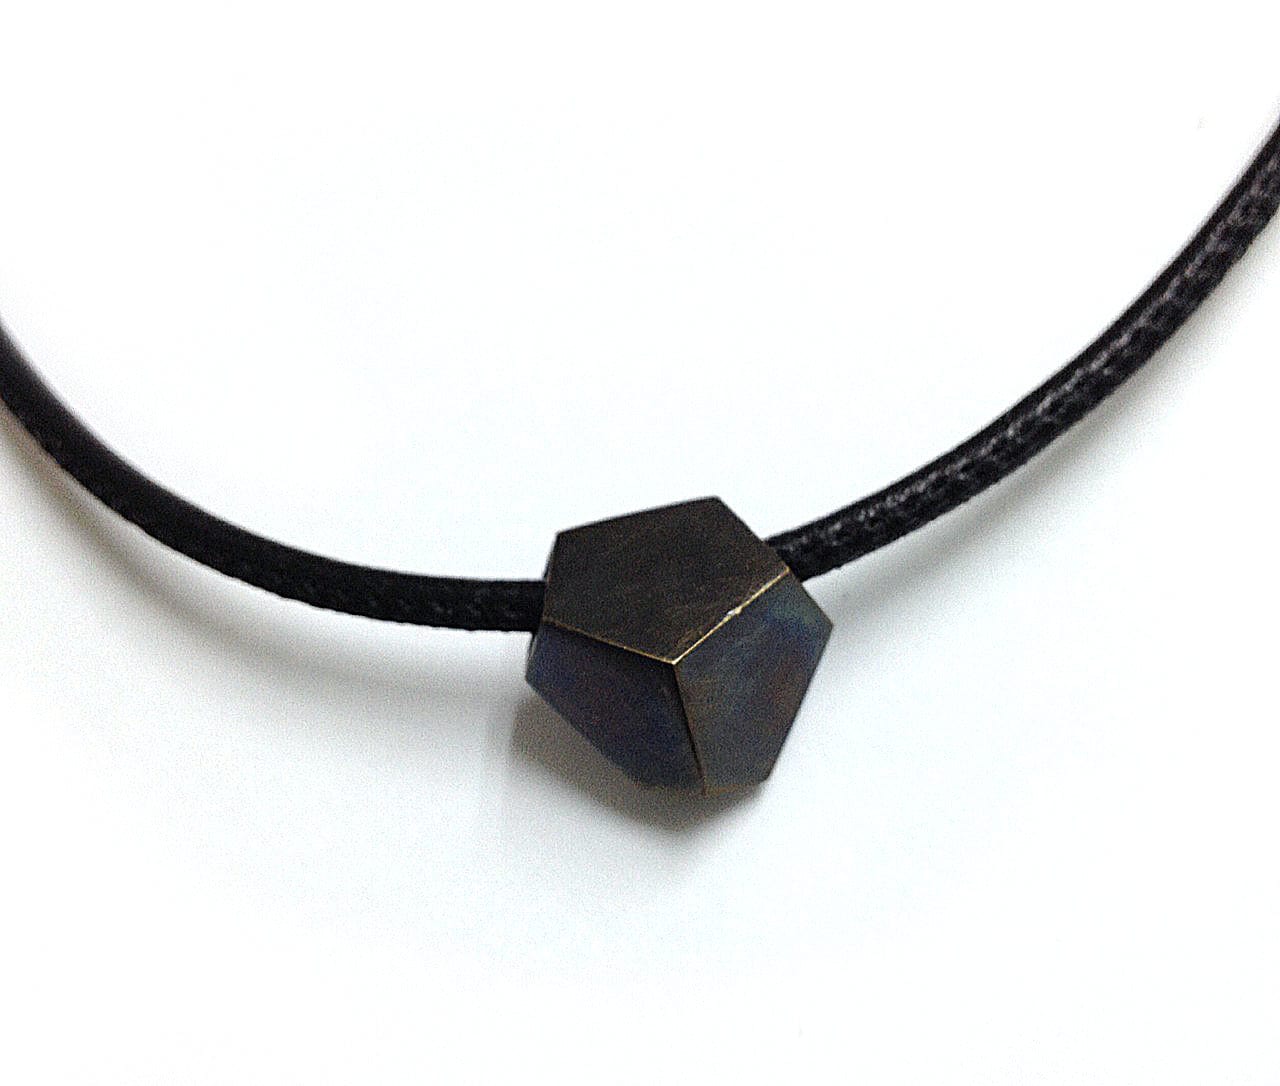 Geometric hexagon shaped oxidized bronze charm on stitched leather chord.  Choker necklace